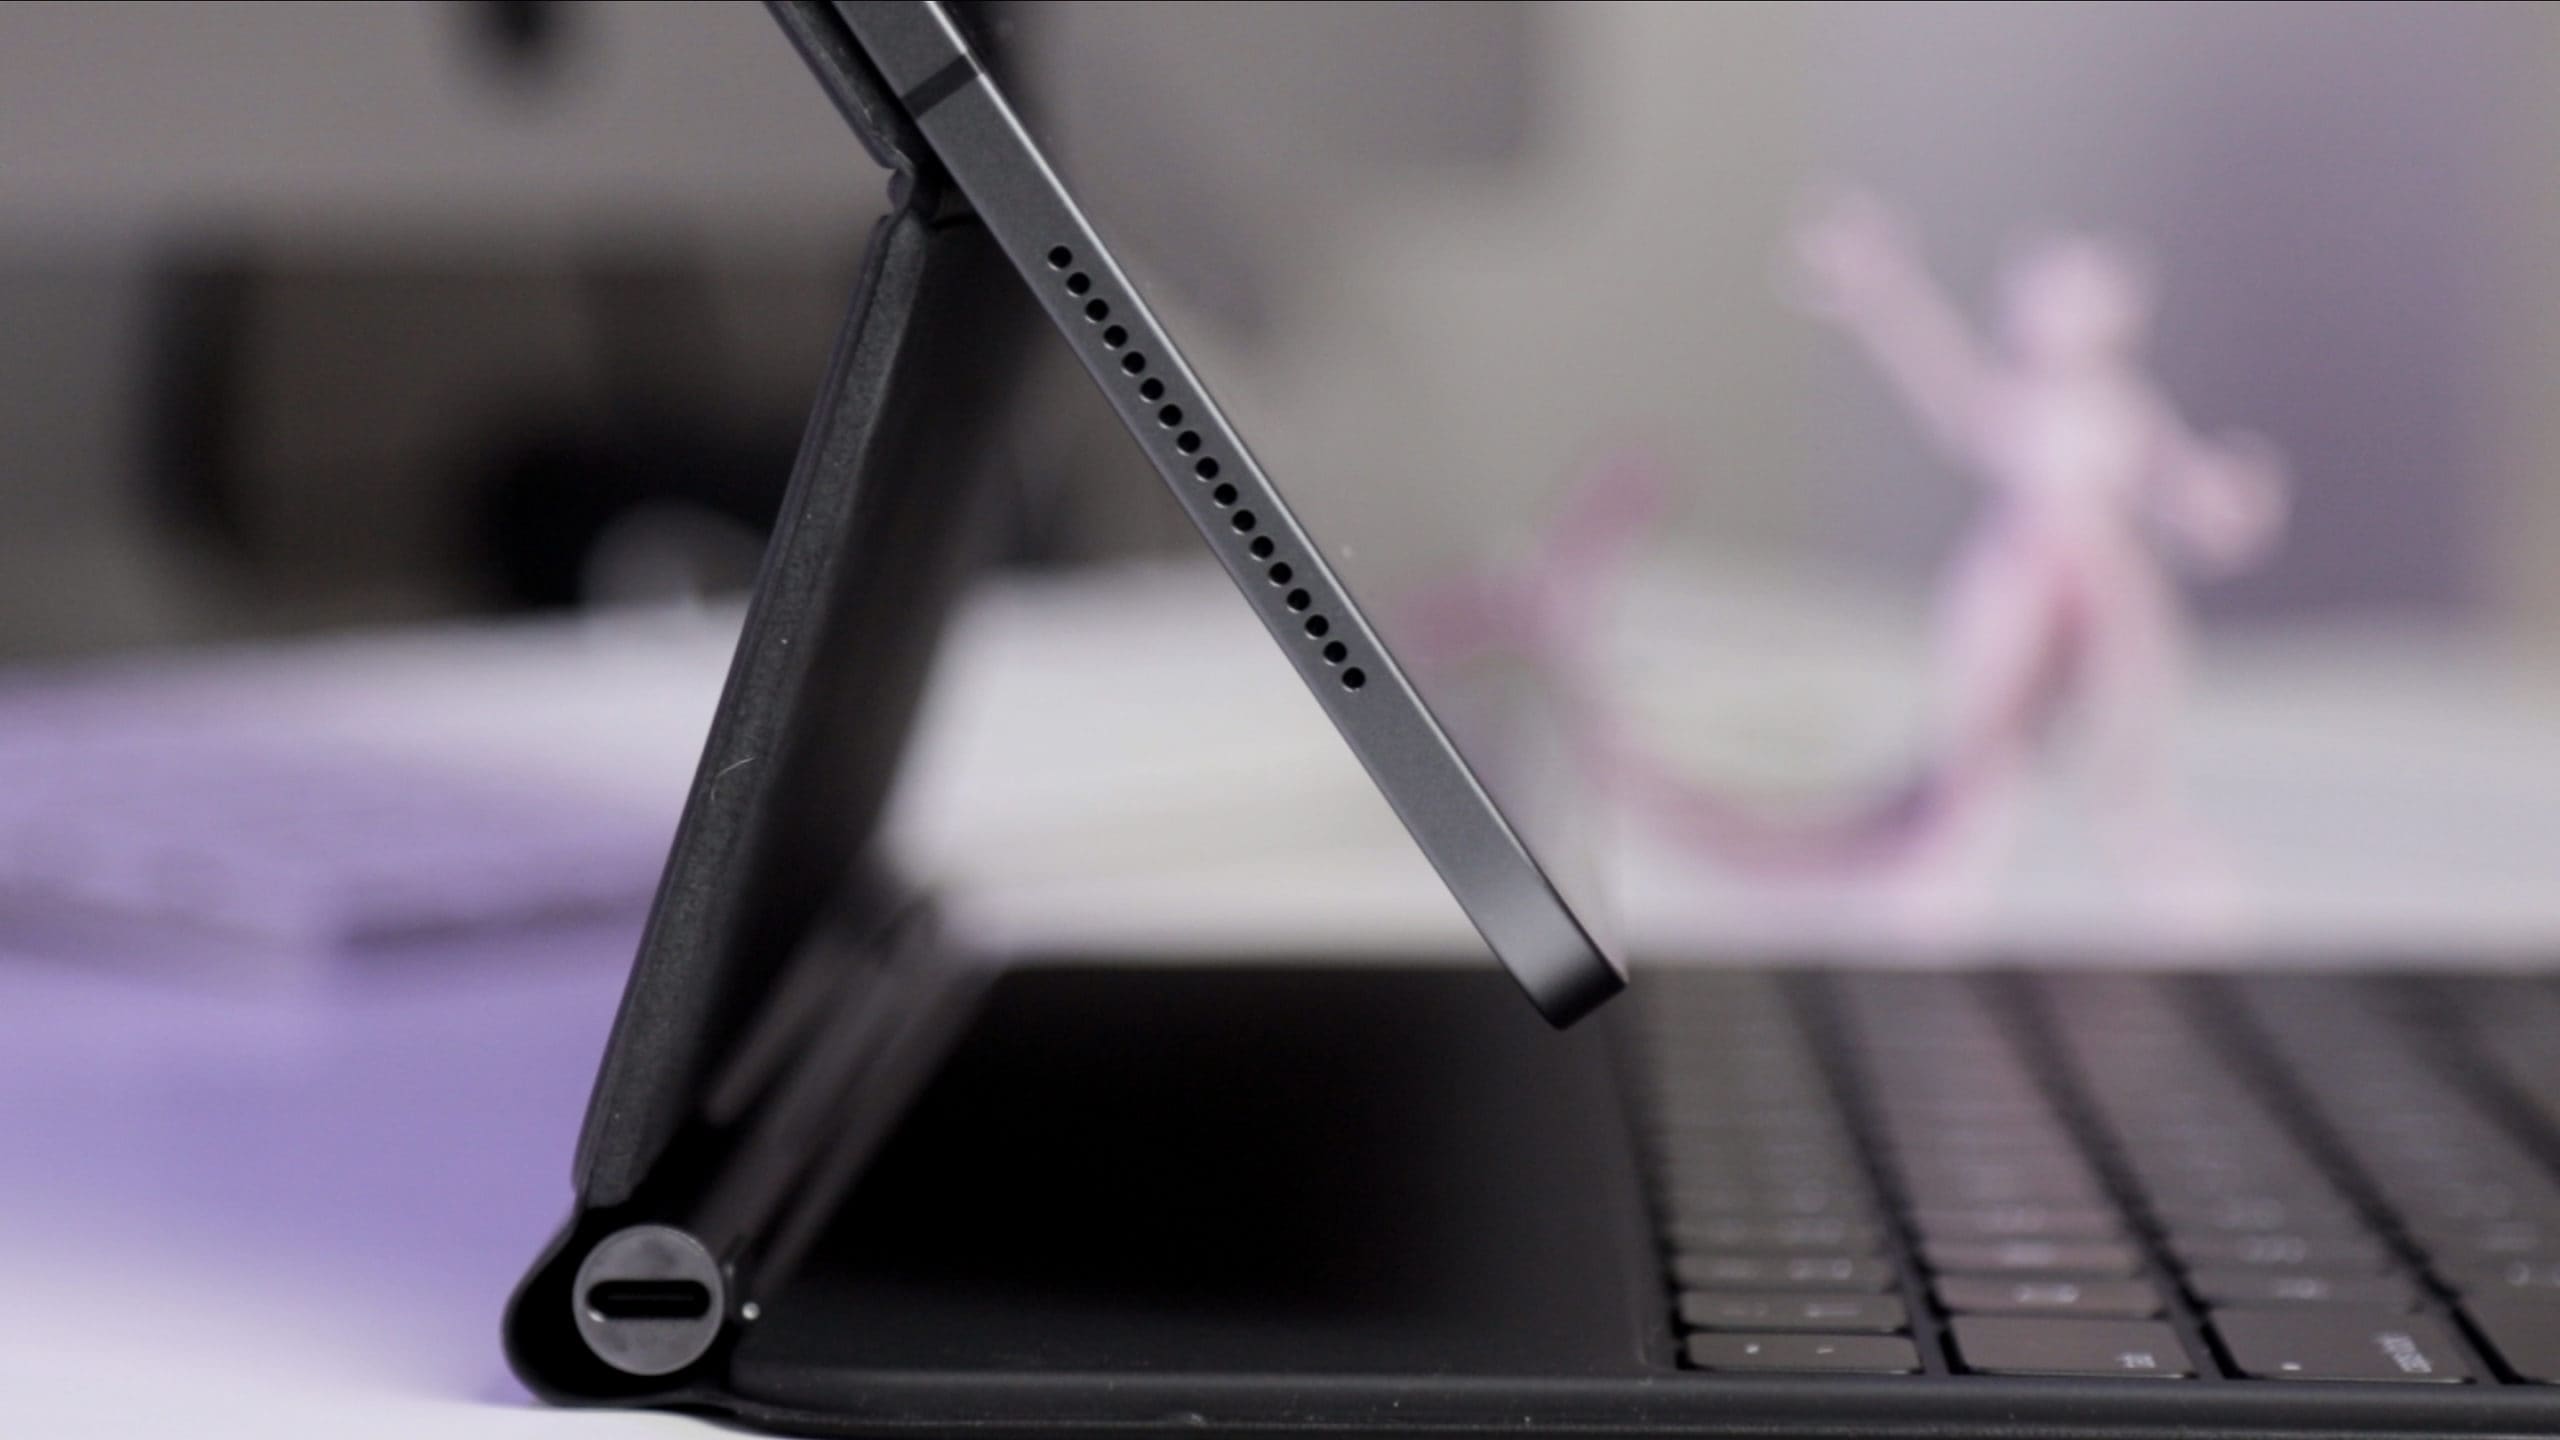 The hinge of the Magic Trackpad is adjustable, and offers pass-through power.